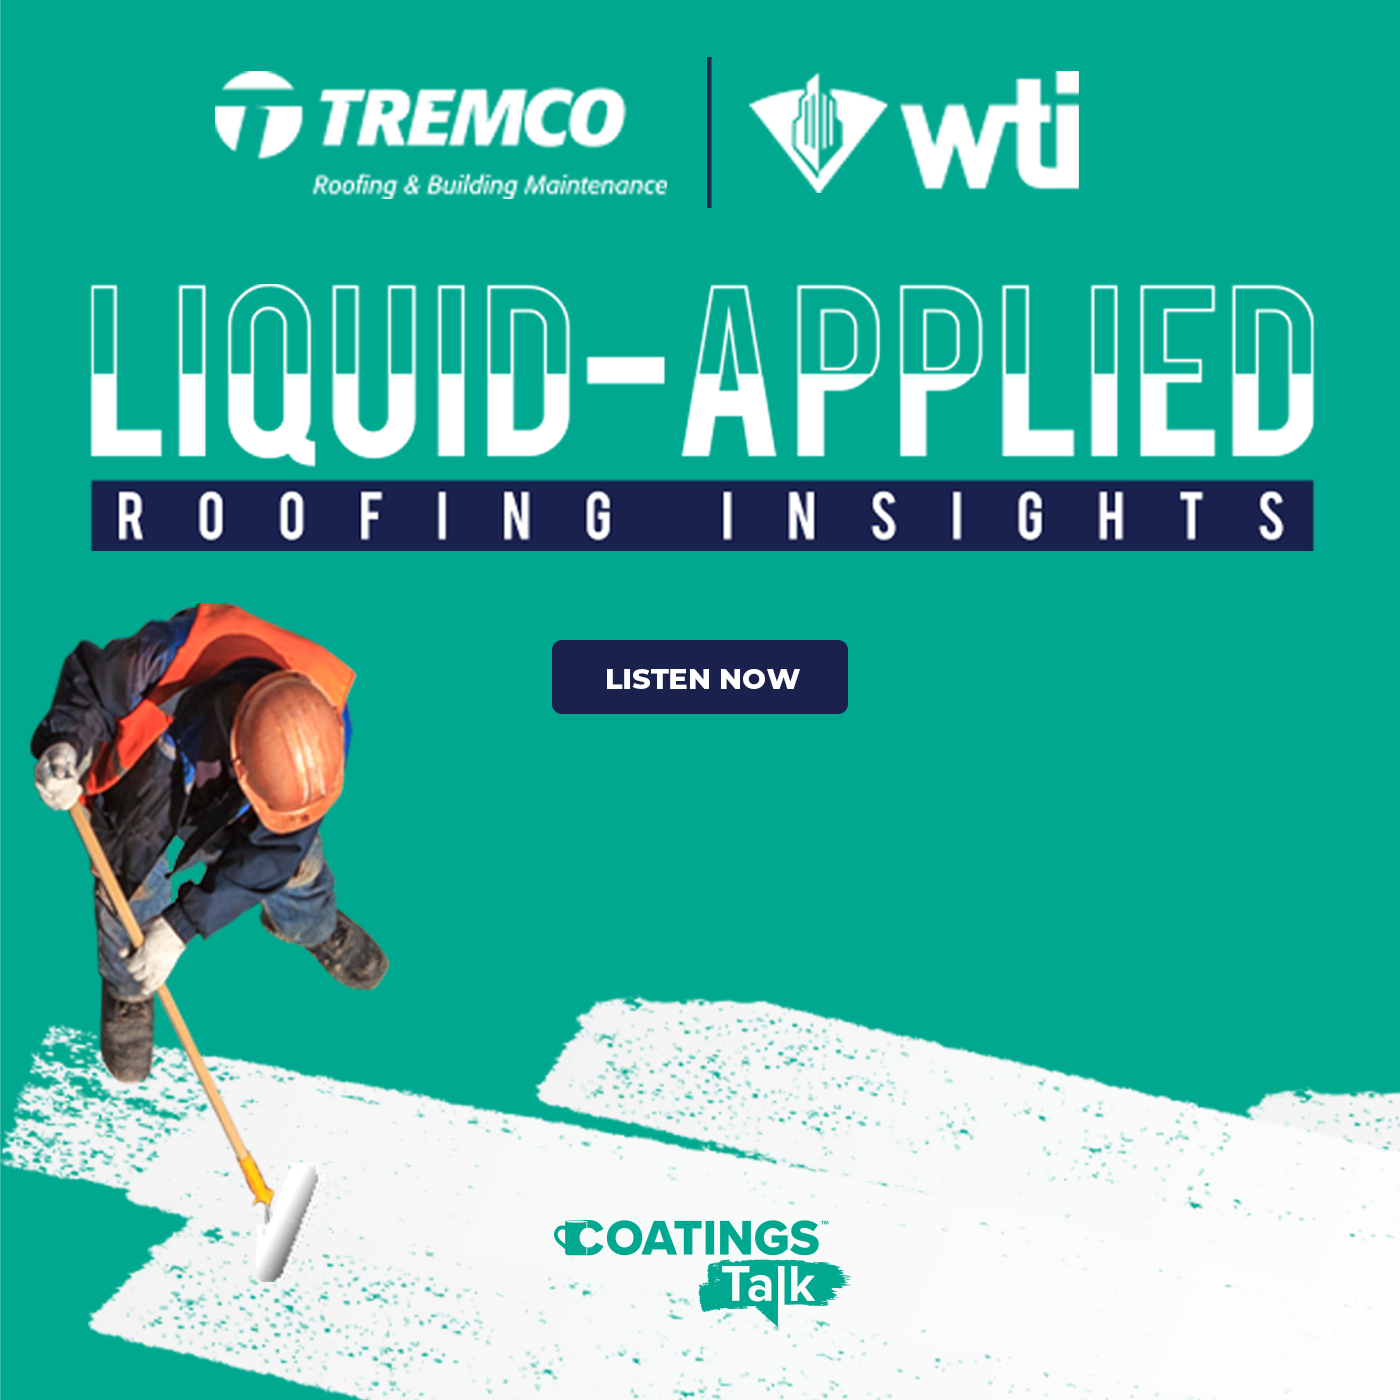 Tremco/WTI - Liquid-applied Roofing Insights (Podcast)